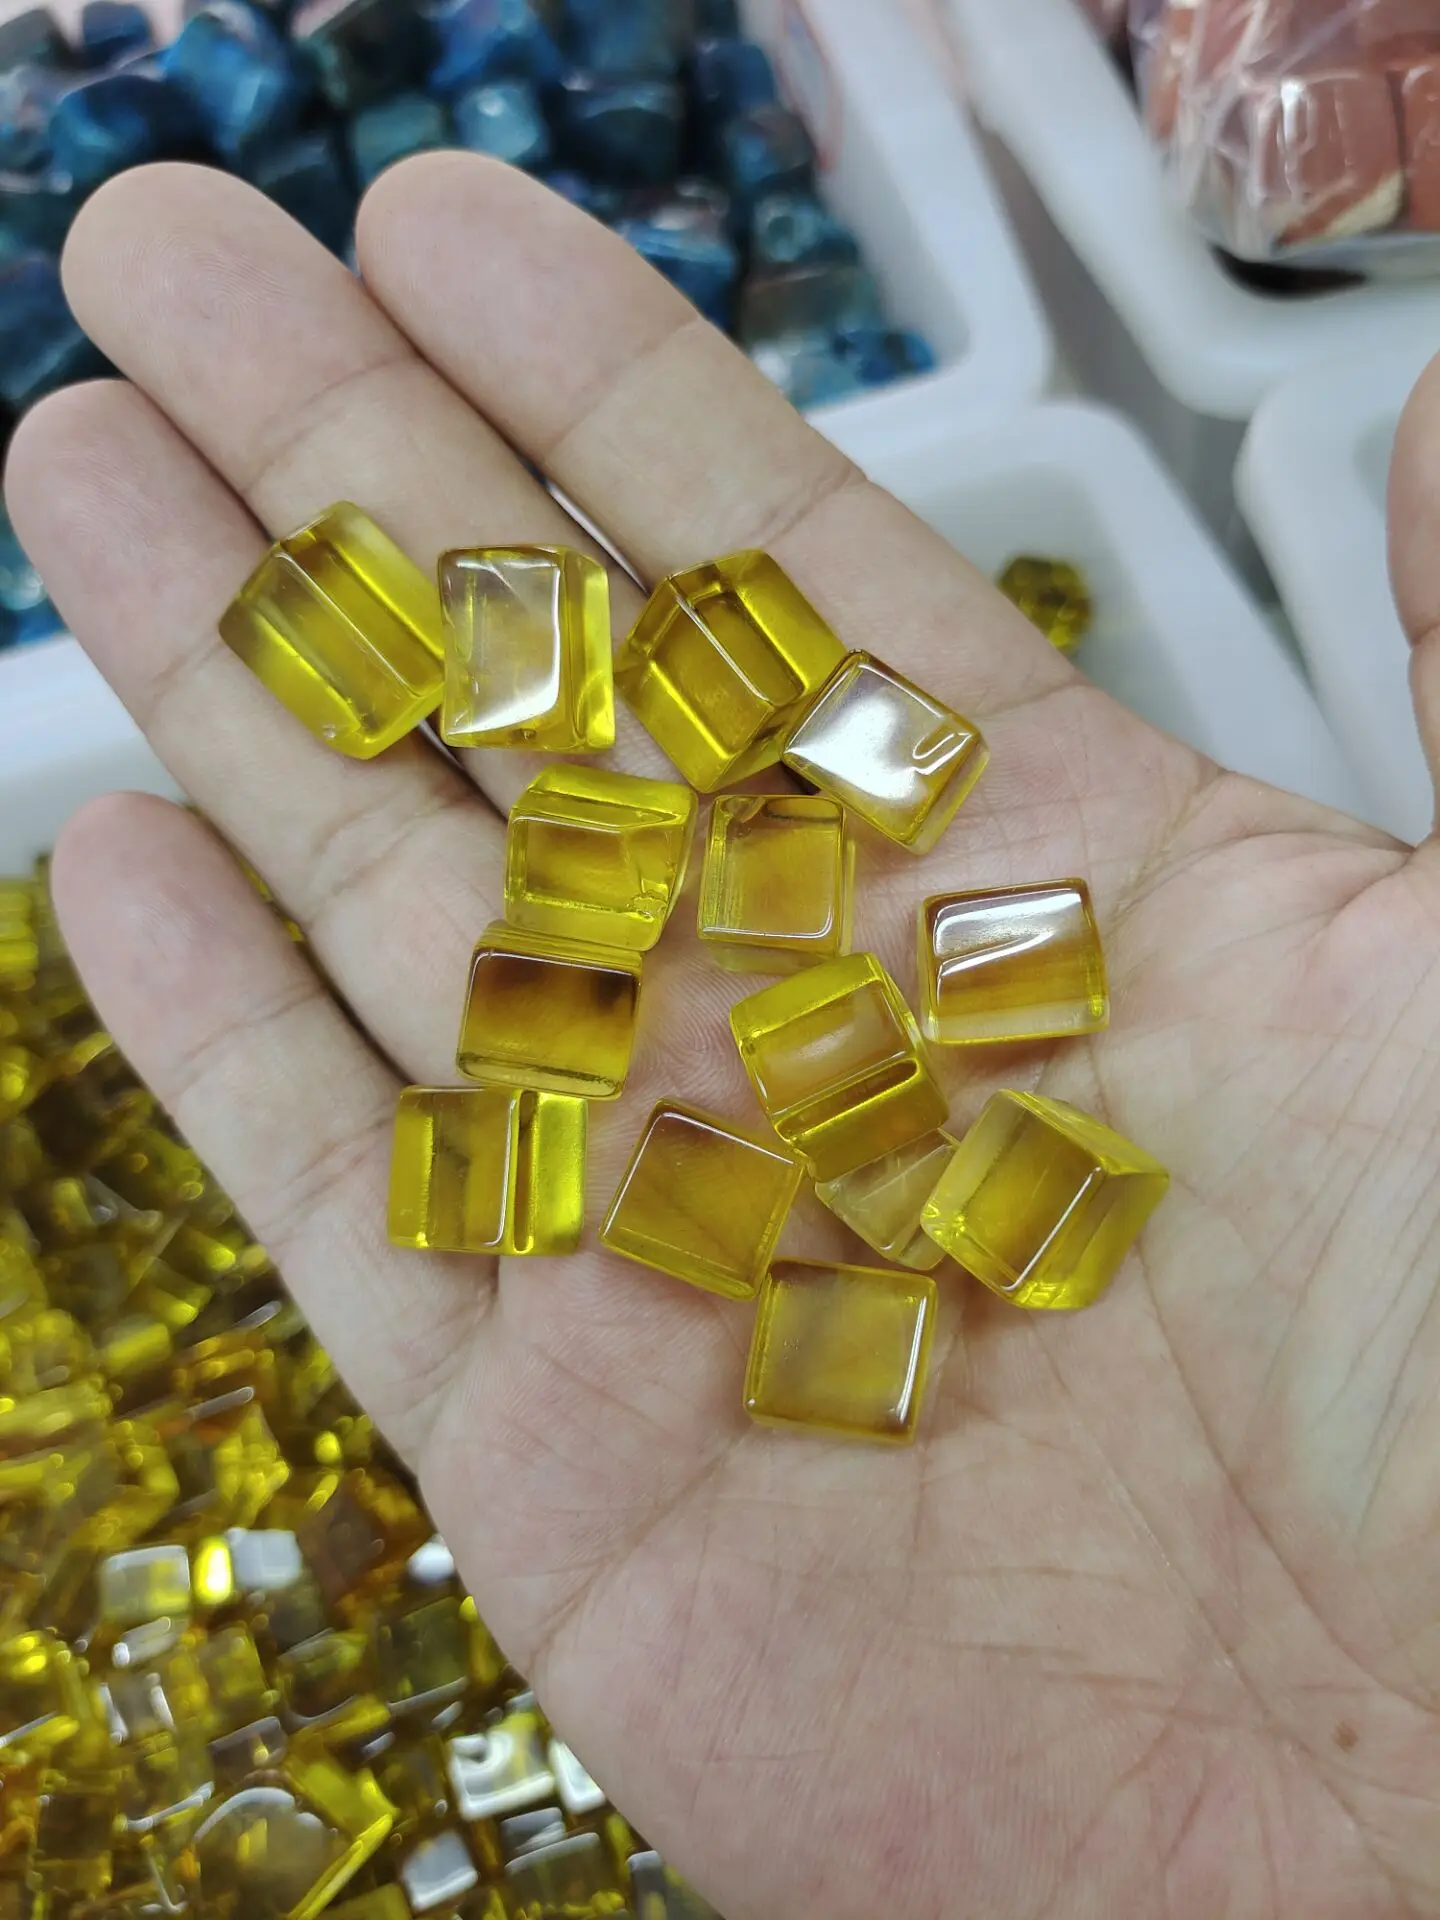 

4AAAA Natural polished yellow citrine quartz cube crystals healing stones for home decoration